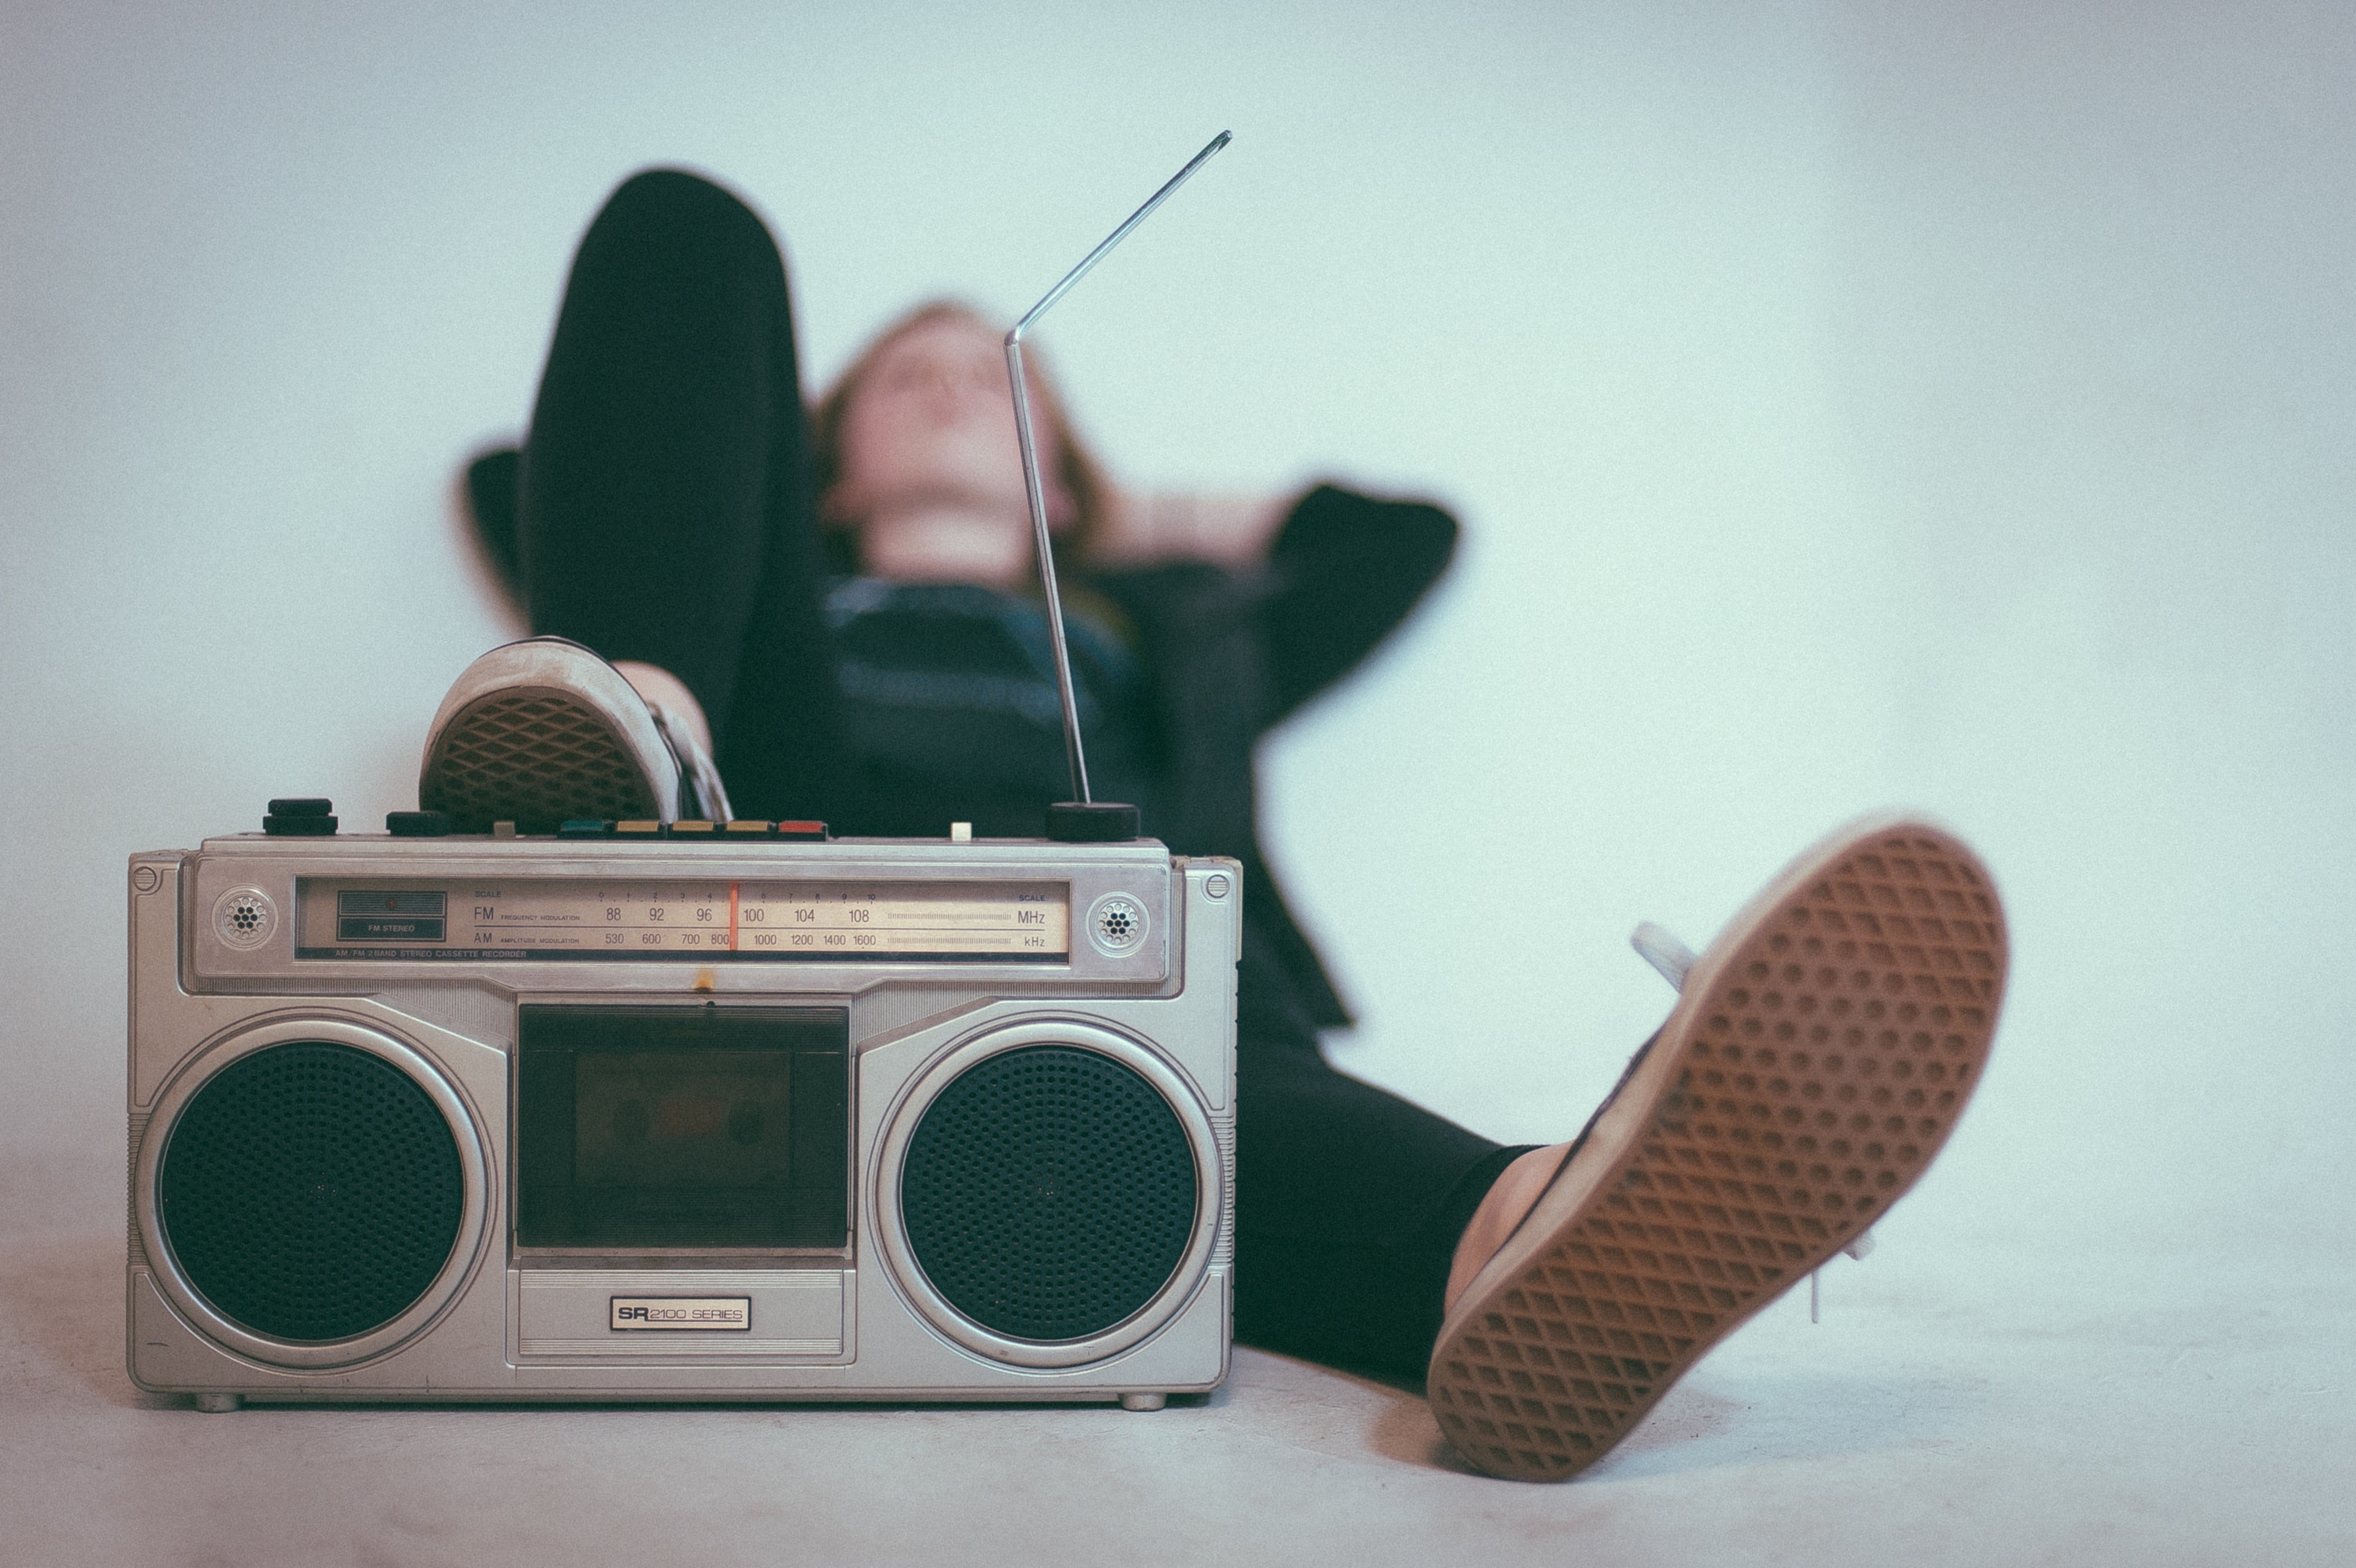 black and gray radio player, photography, lying down, music, technology